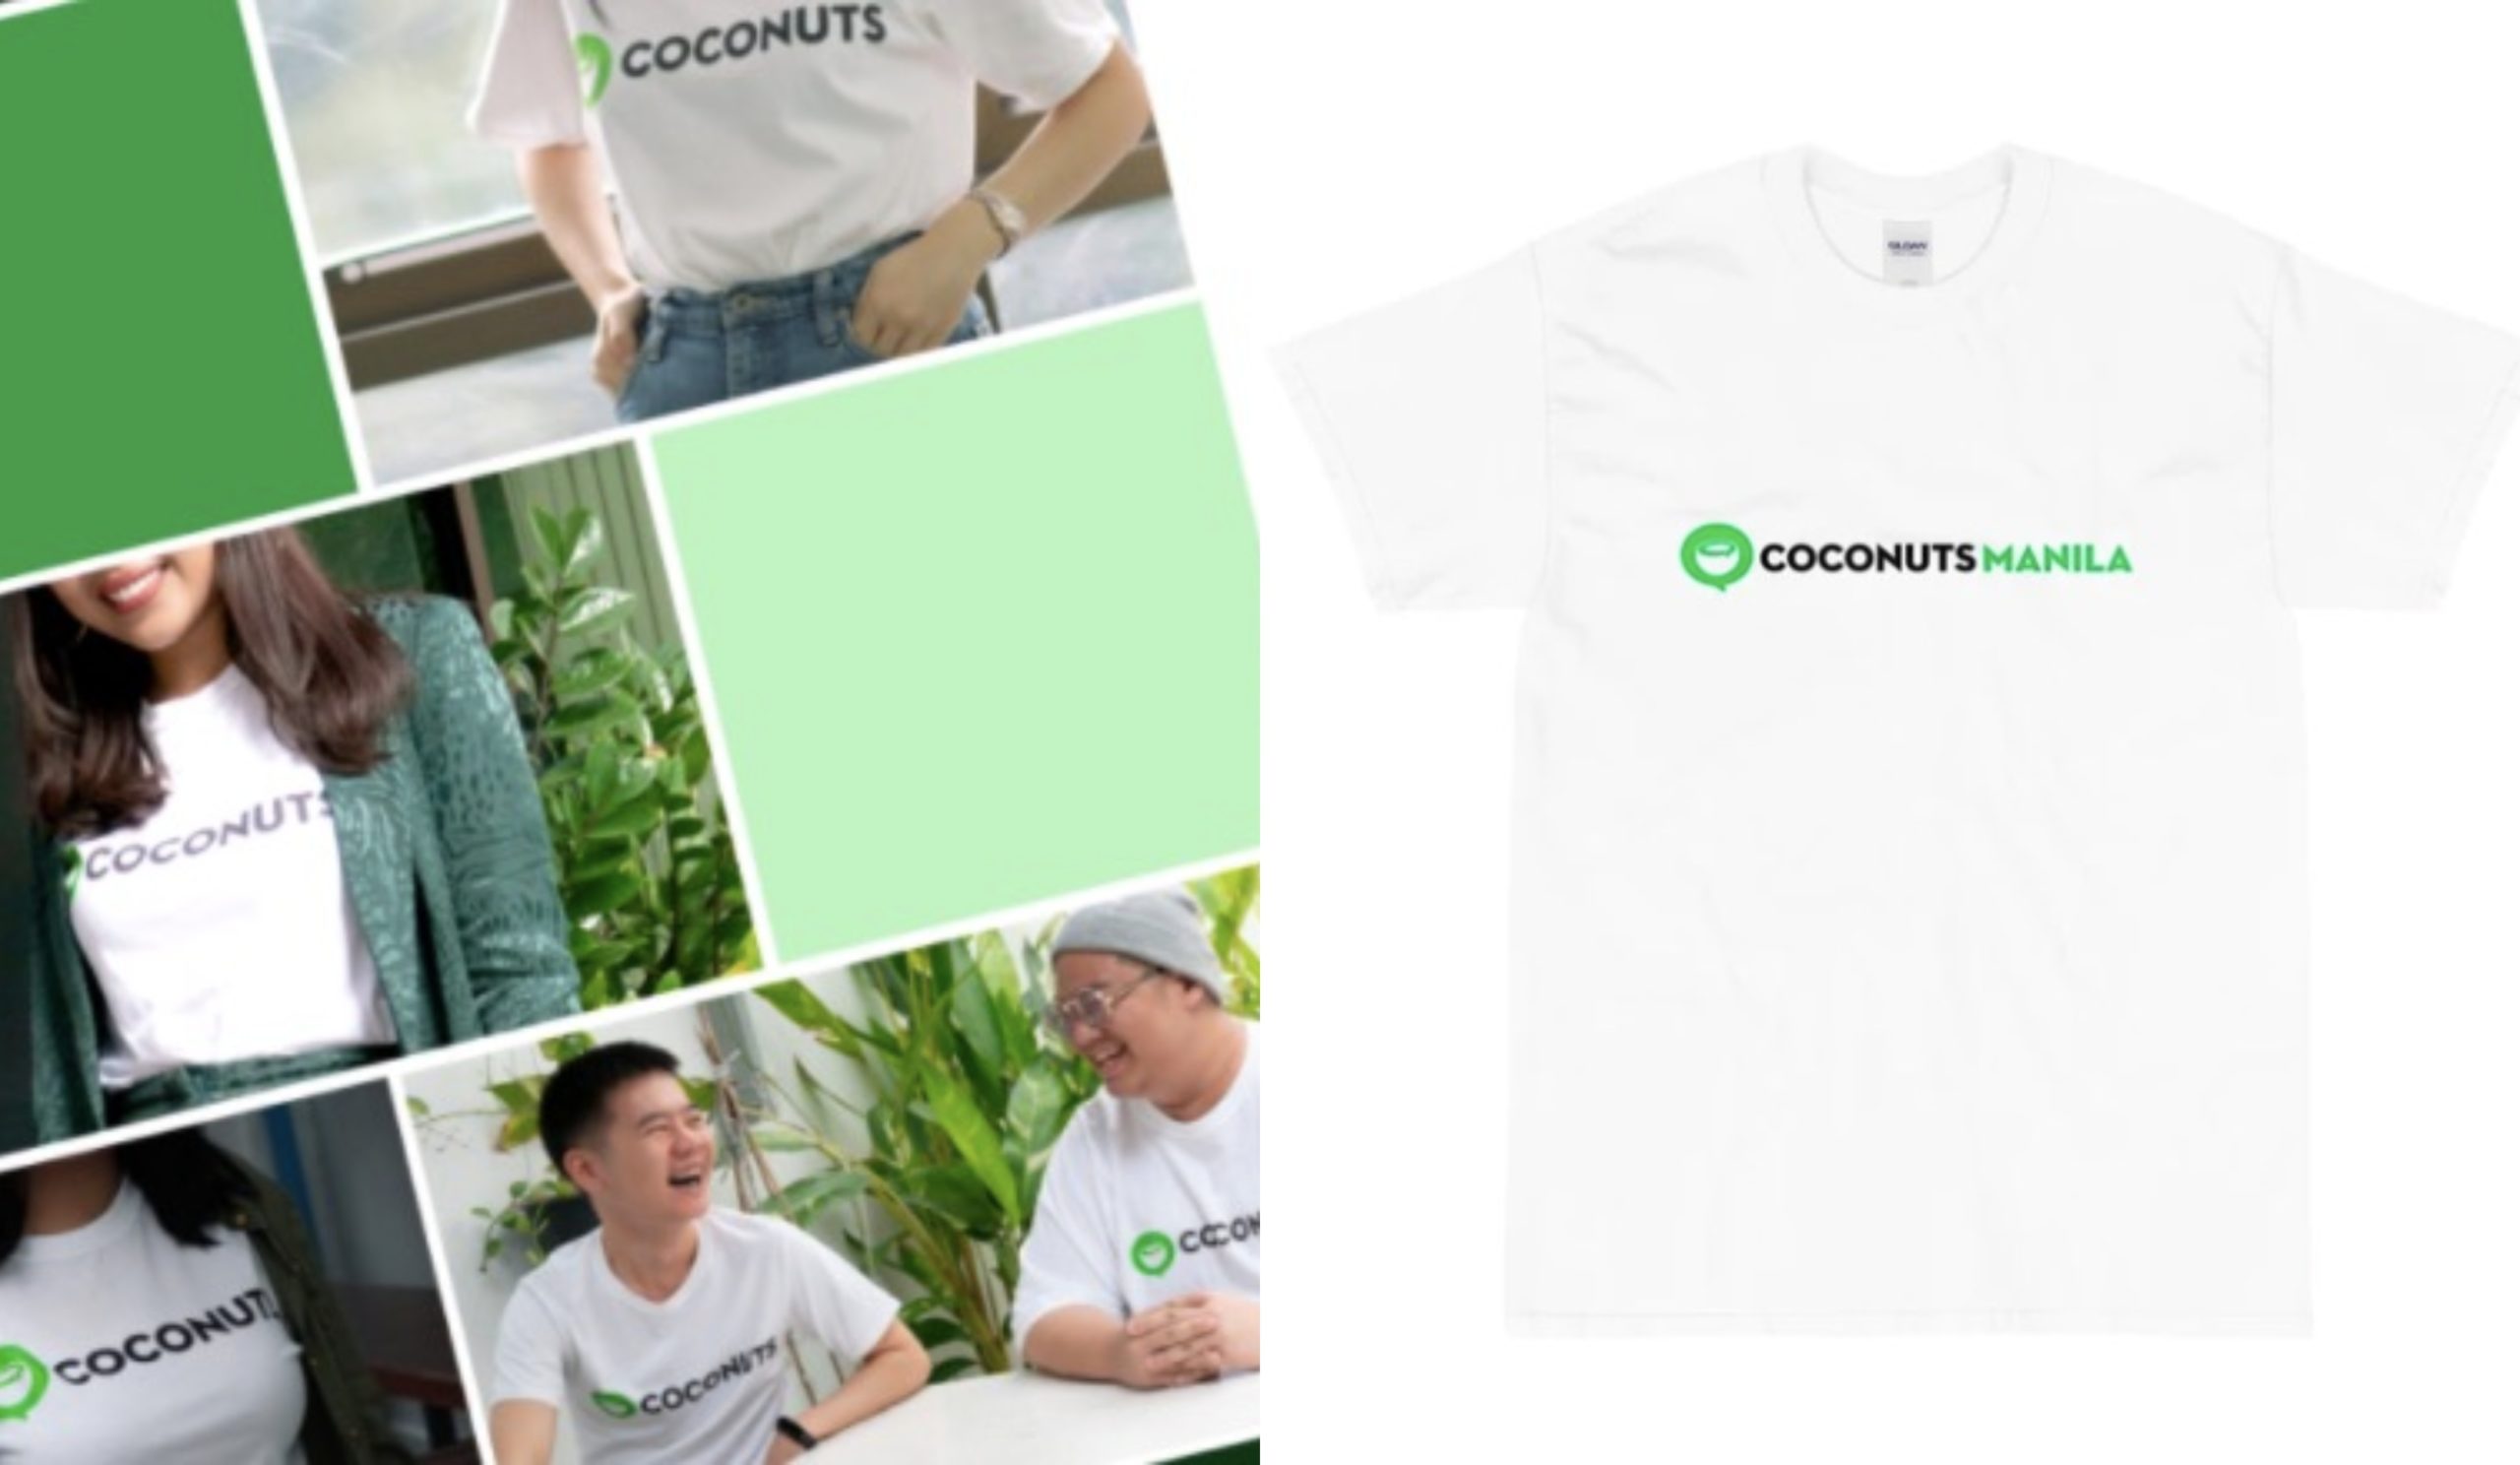 Rep your city with the Coconuts Manila tee!